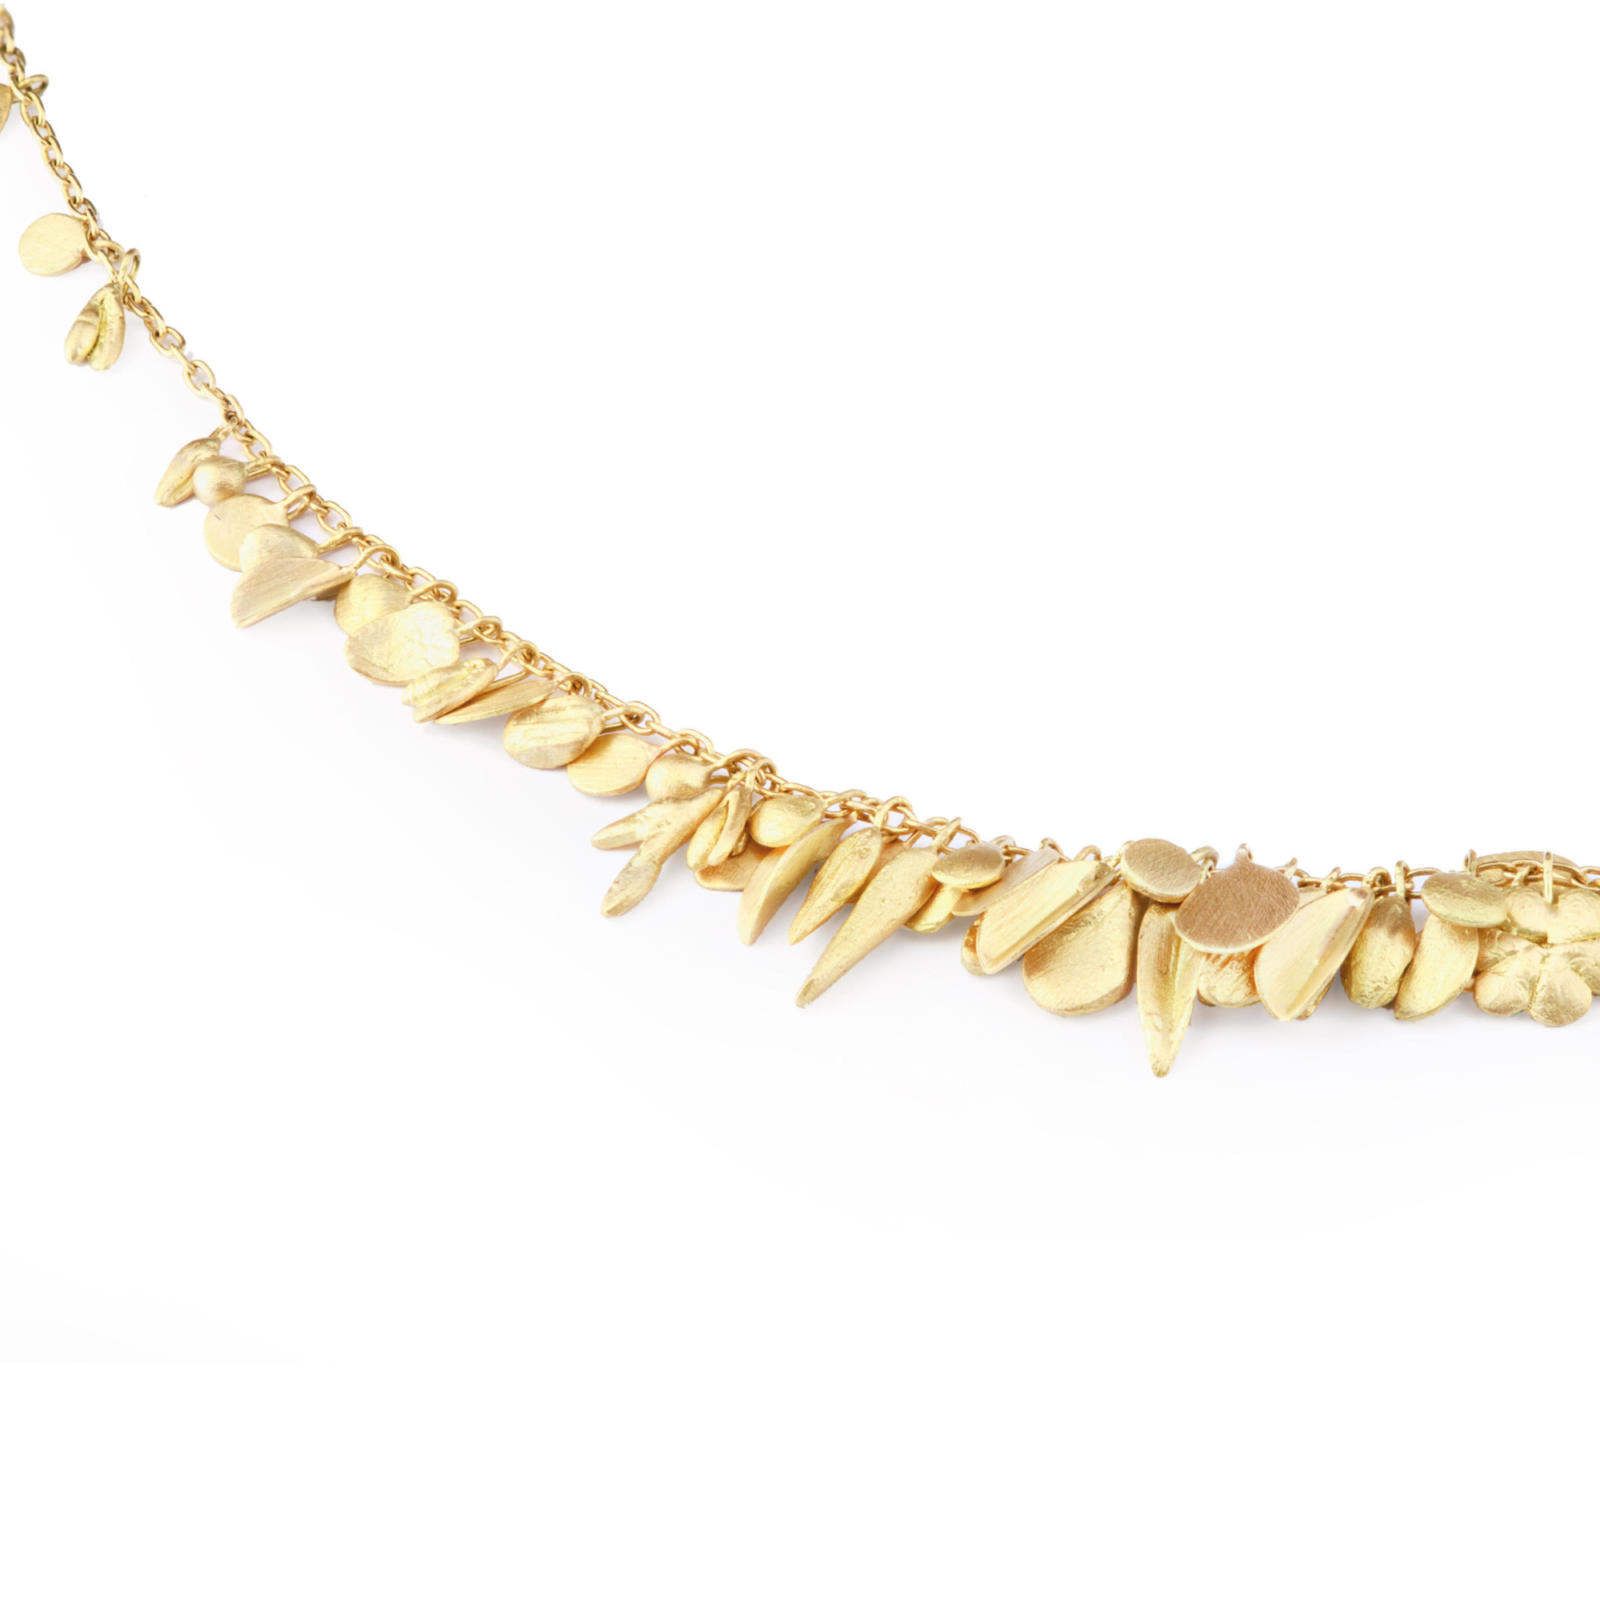 Sia Taylor MN1 Y Yellow Gold Necklace C